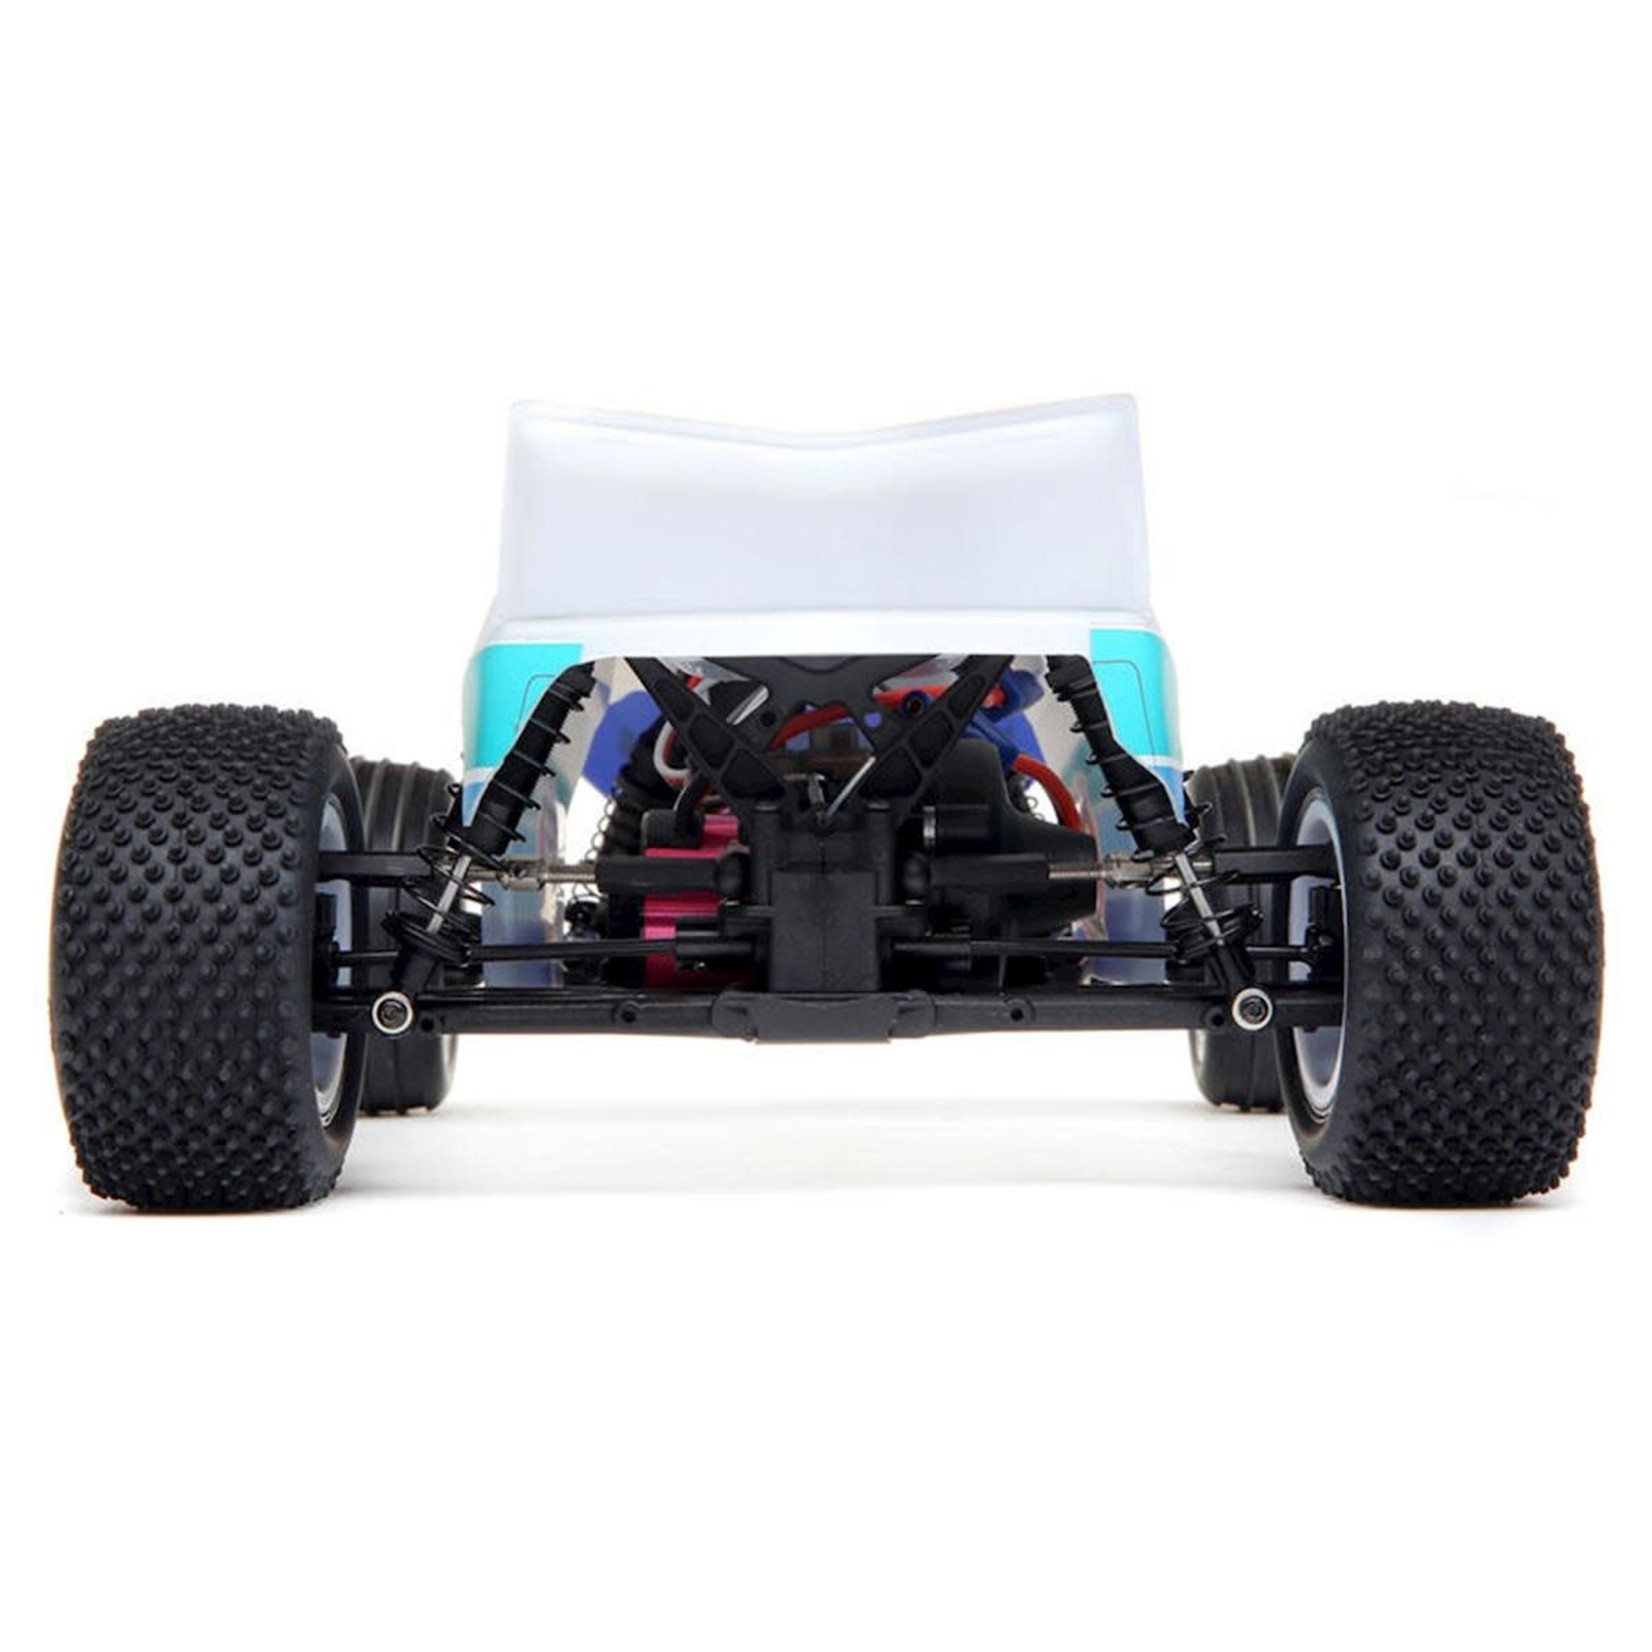 Losi Losi Mini-T 2.0 1/18 RTR 2WD Brushless Stadium Truck (Blue) w/2.4GHz Radio, Battery & Charger #LOS01019T2